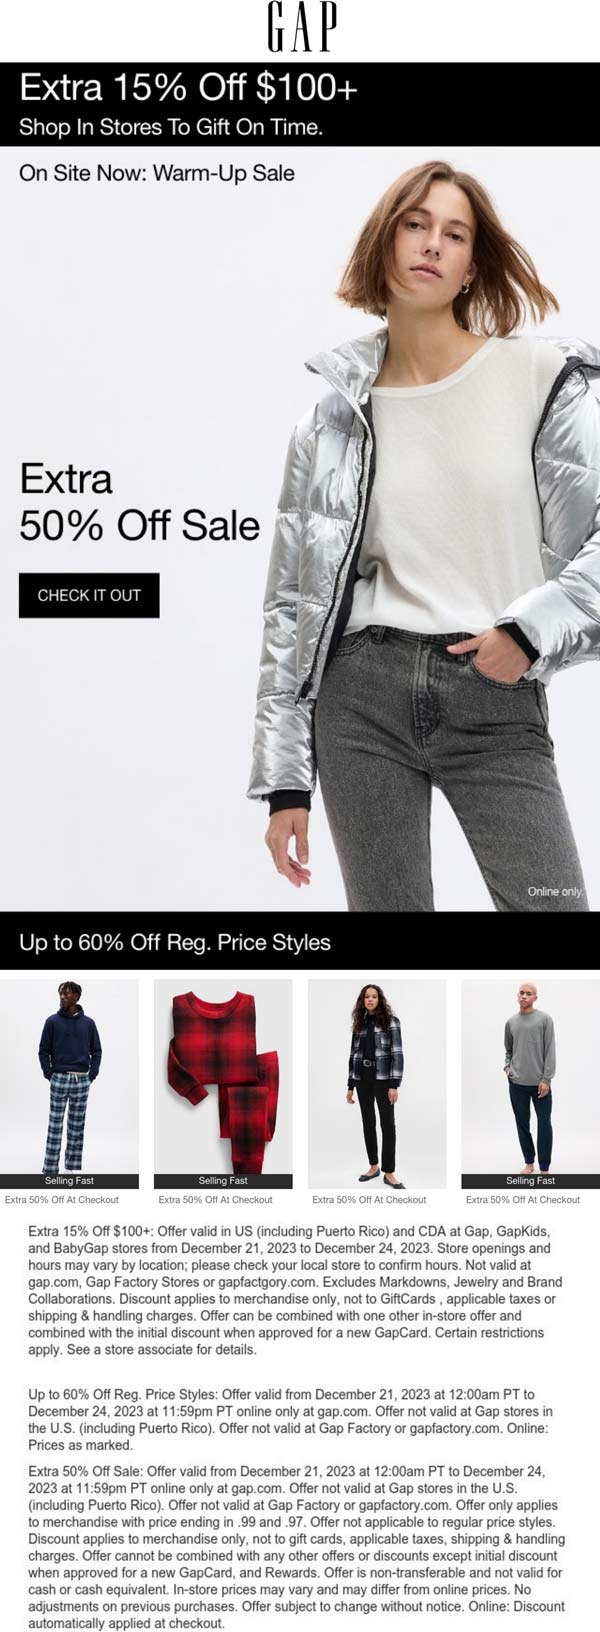 Extra 50% off sale items & another 15% off $100+ at Gap #gap